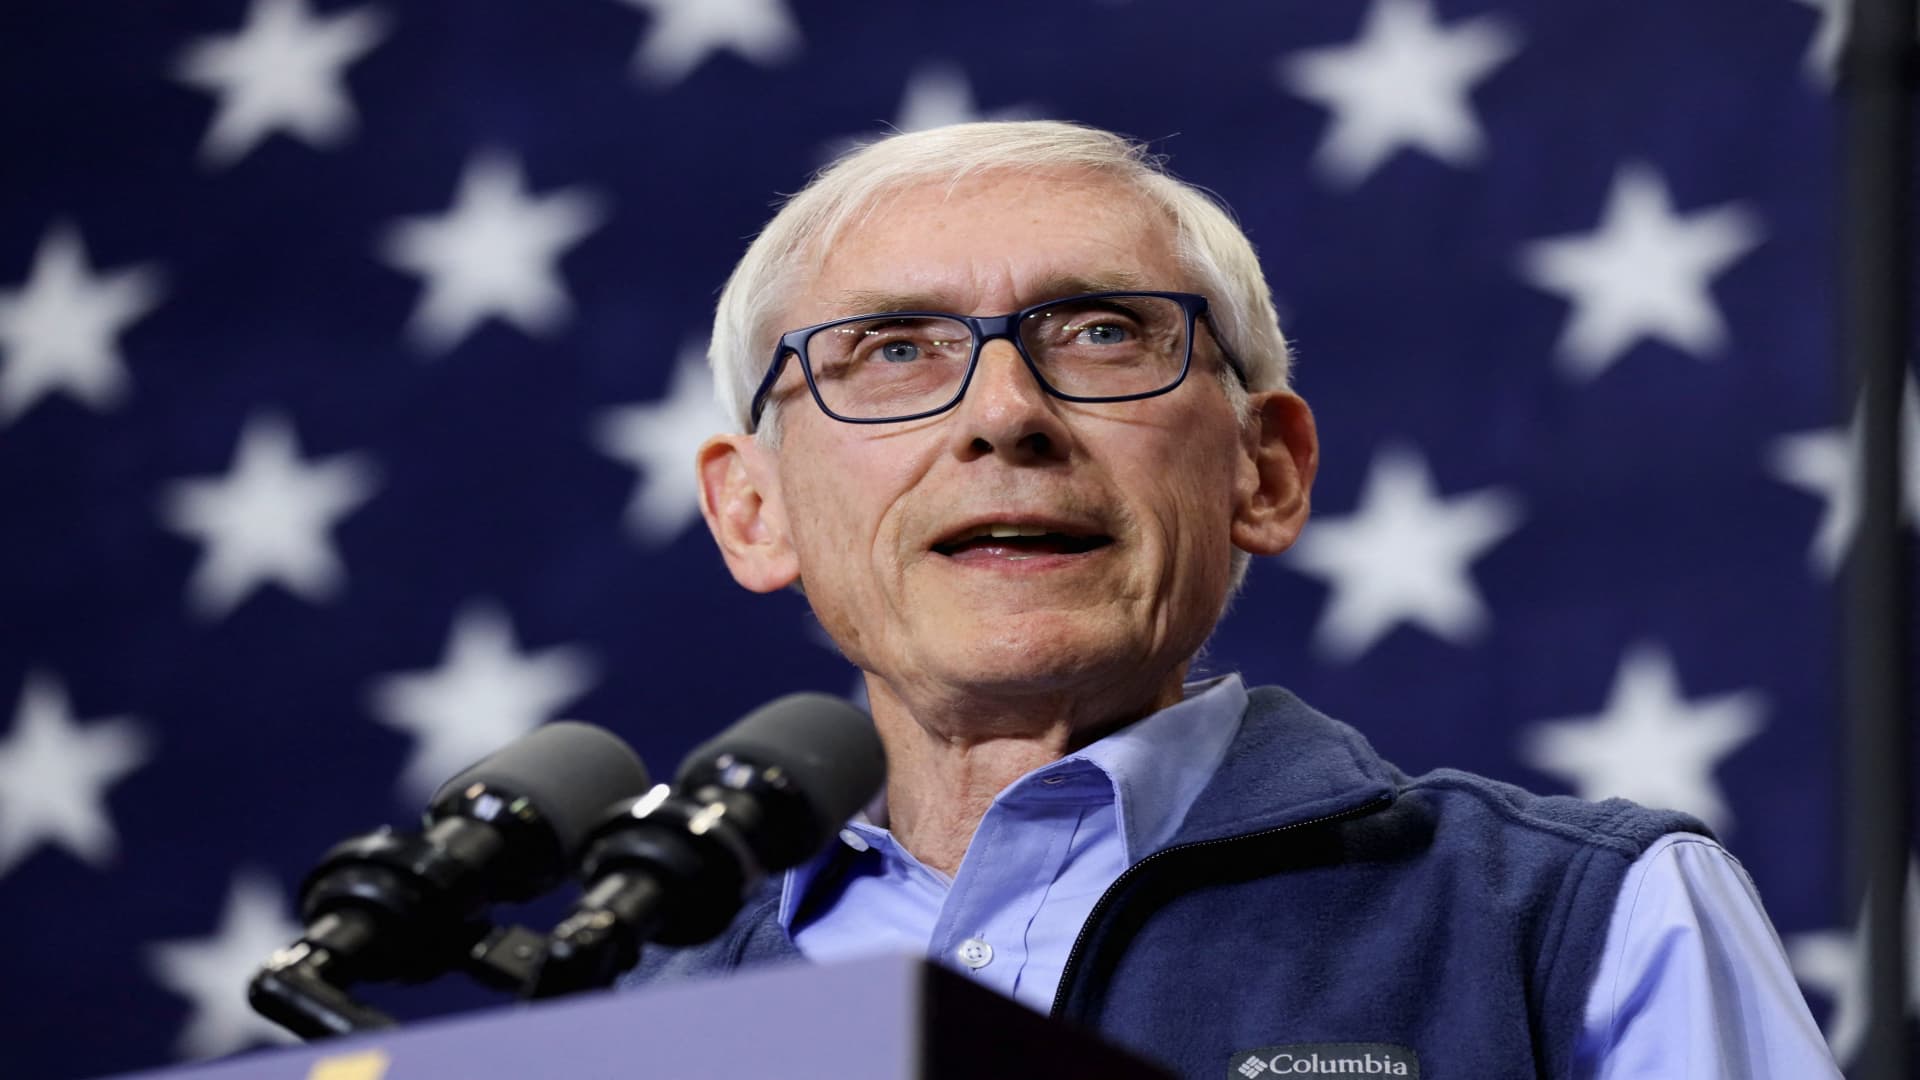 Gov. Tony Evers speaks at a rally with former U.S. President Barack Obama and Wisconsin Governor Tony Evers before the mid-term elections in Milwaukee, Wisconsin, U.S. October 29, 2022. 